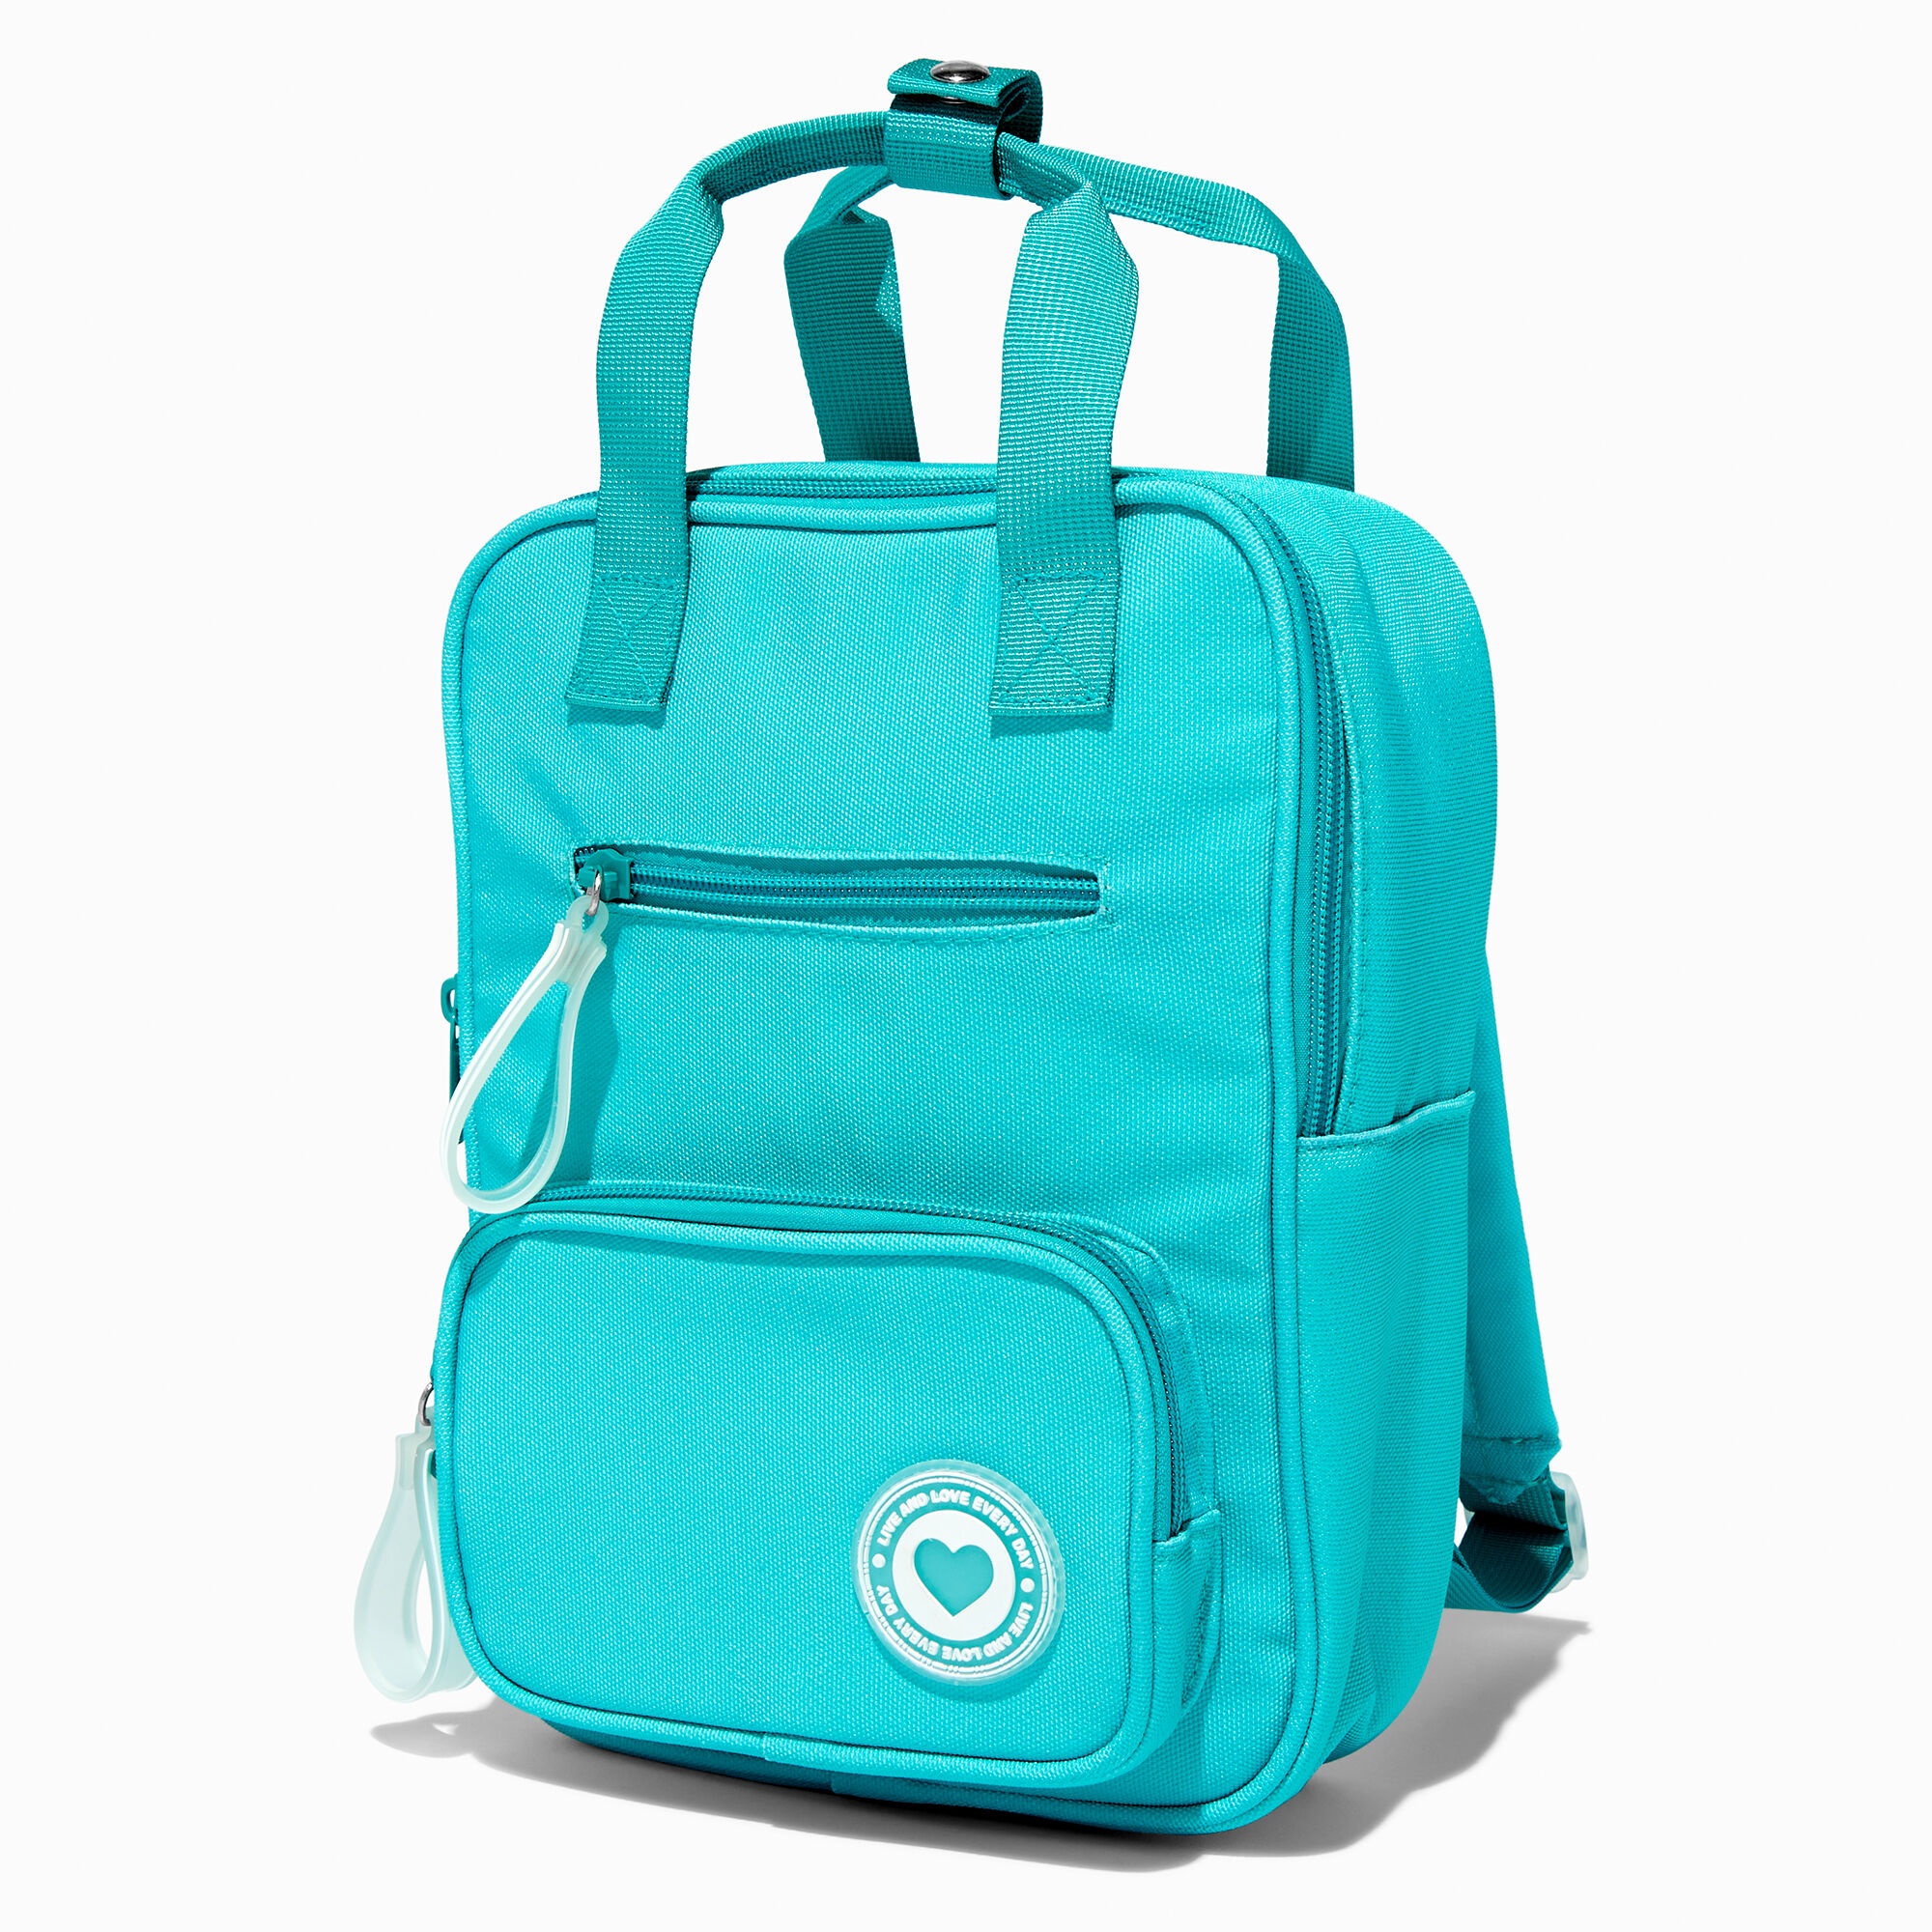 View Claires Club Canvas Backpack Turquoise information